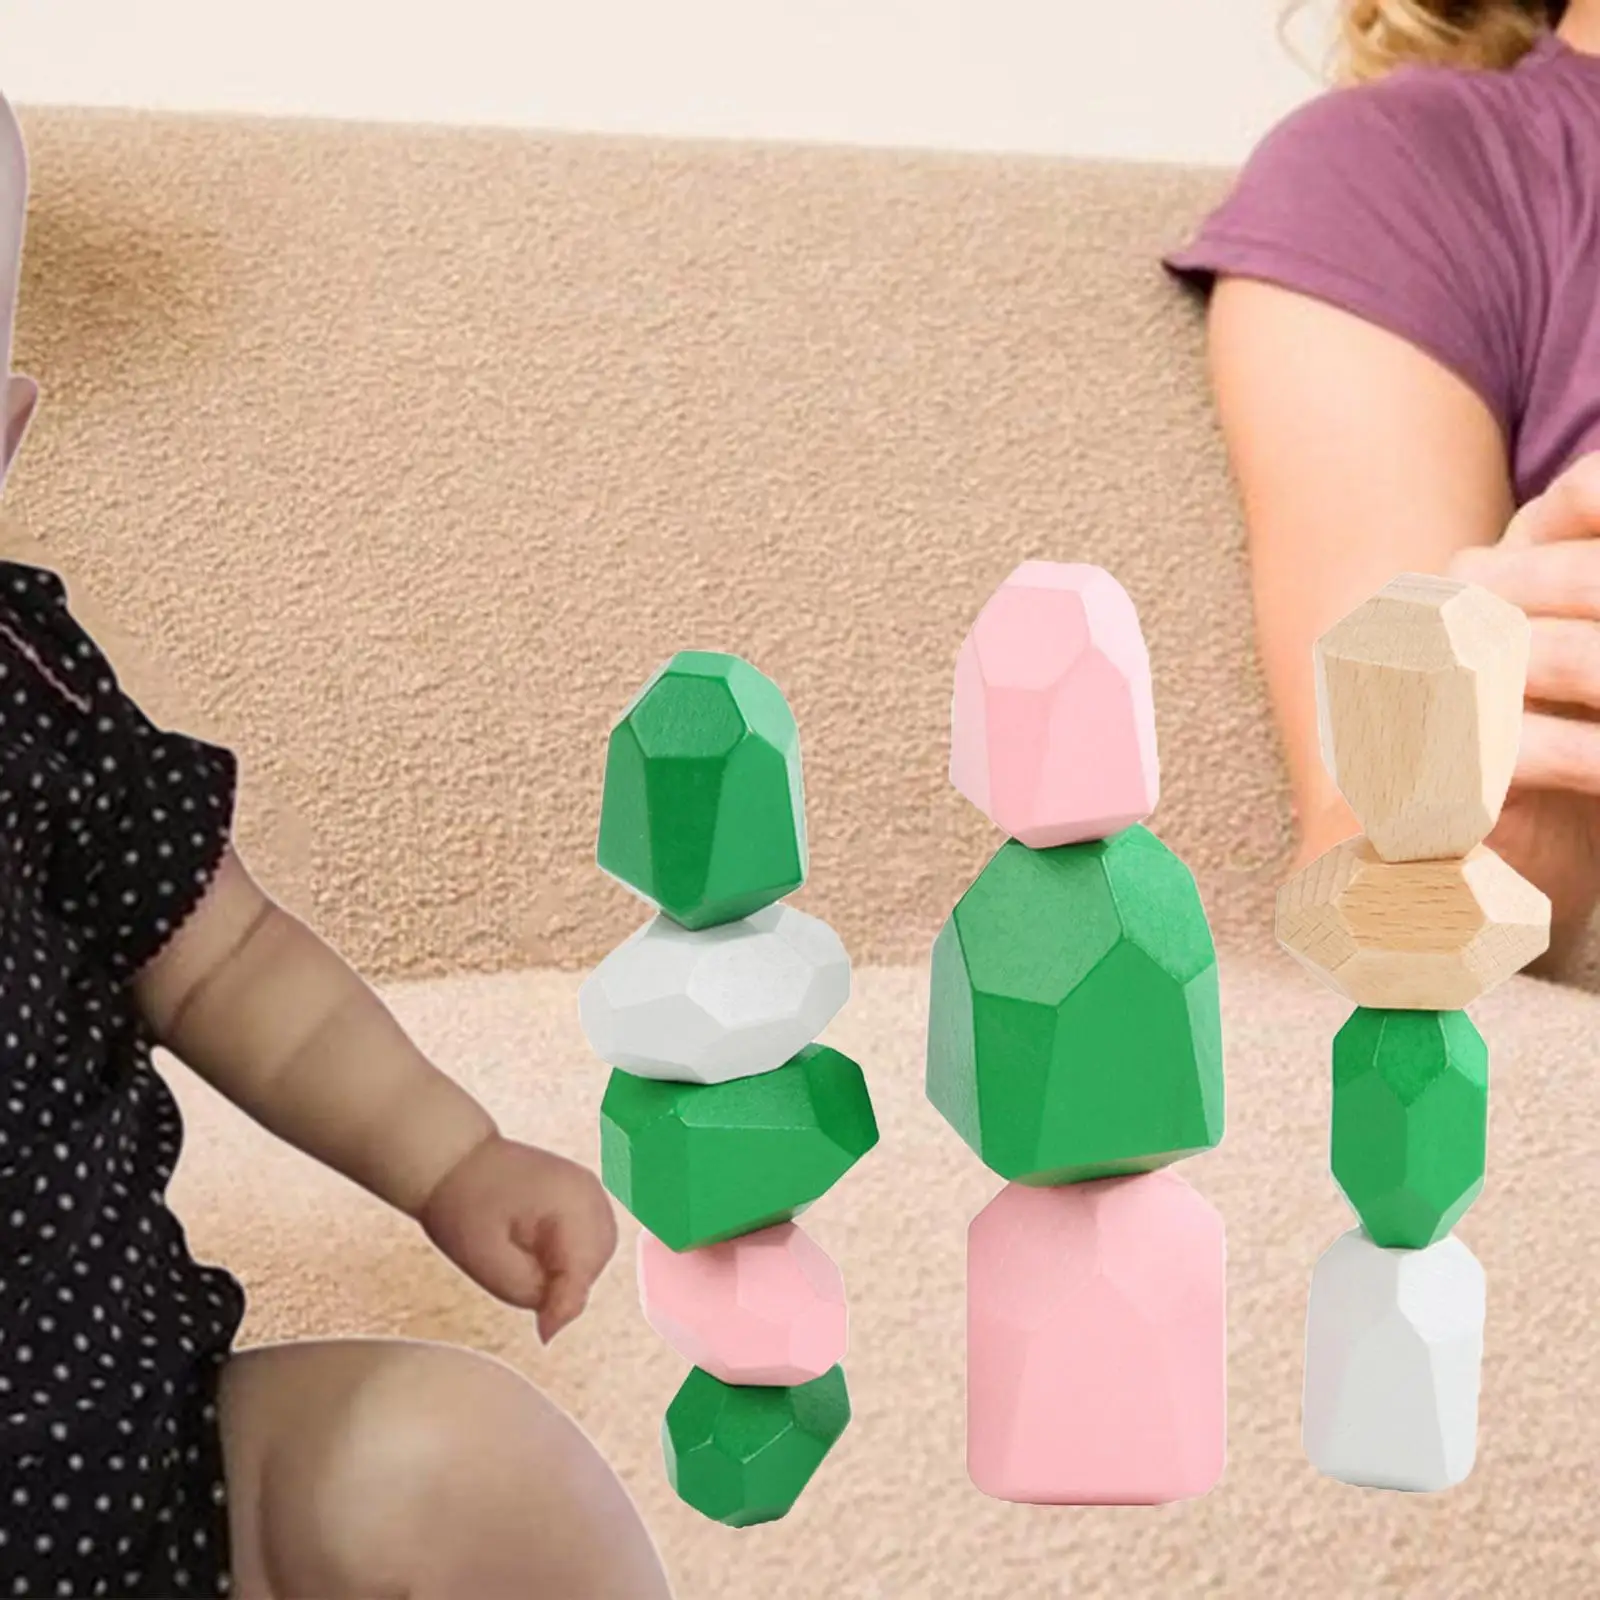 Baby Stacking Game Balancing Stone Interaction Toy Puzzle Toy Motor Skills Educational Colorful Kids Wooden Toys Ages 3 Years up